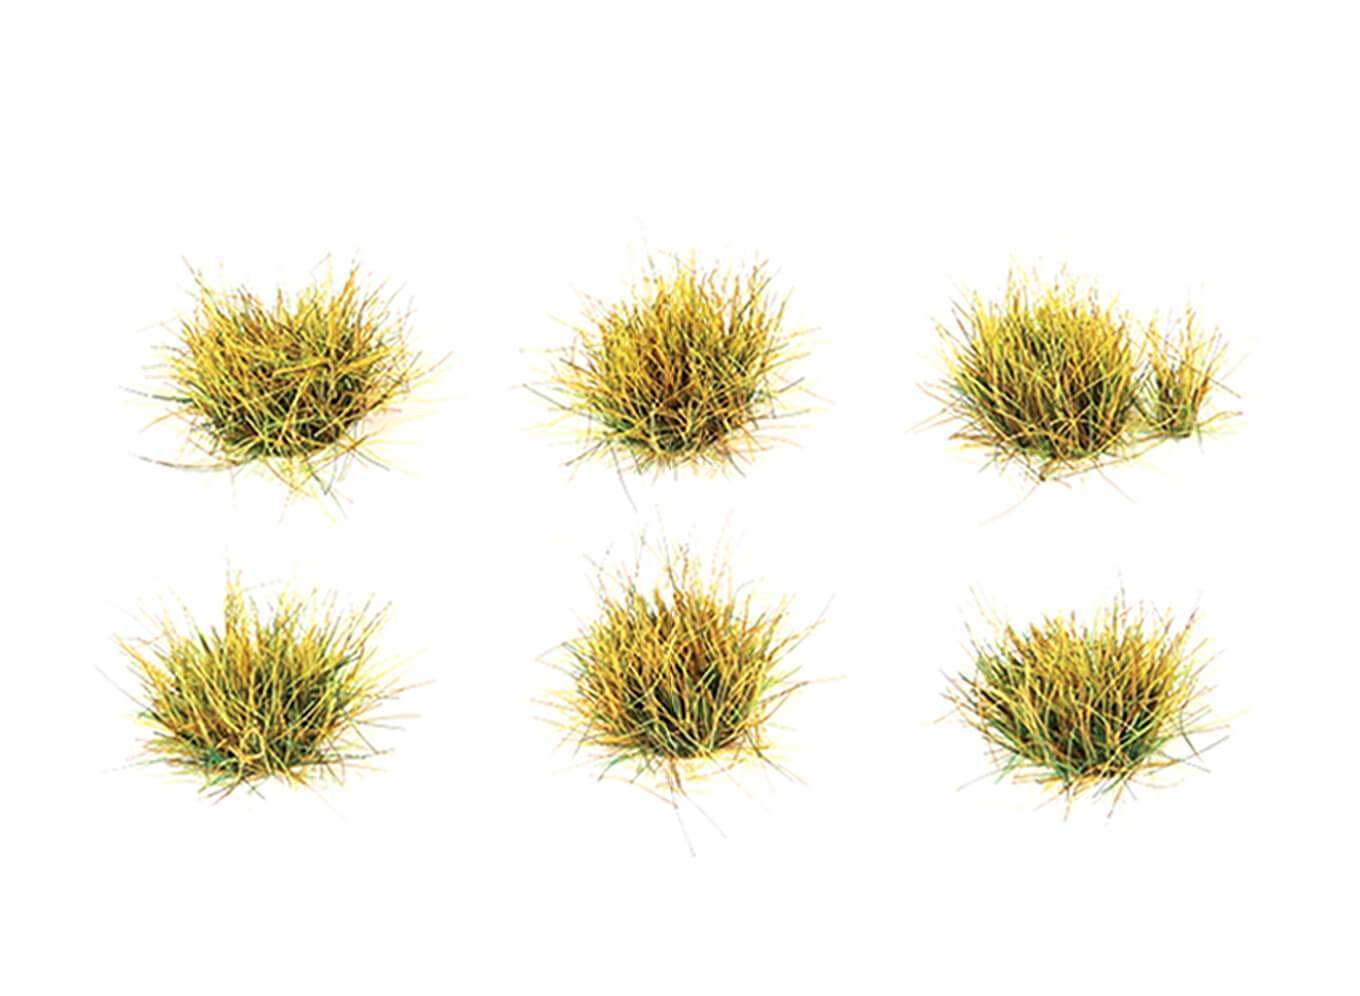 PECO Model Trains | 10mm Self Adhesive Spring Grass Tufts